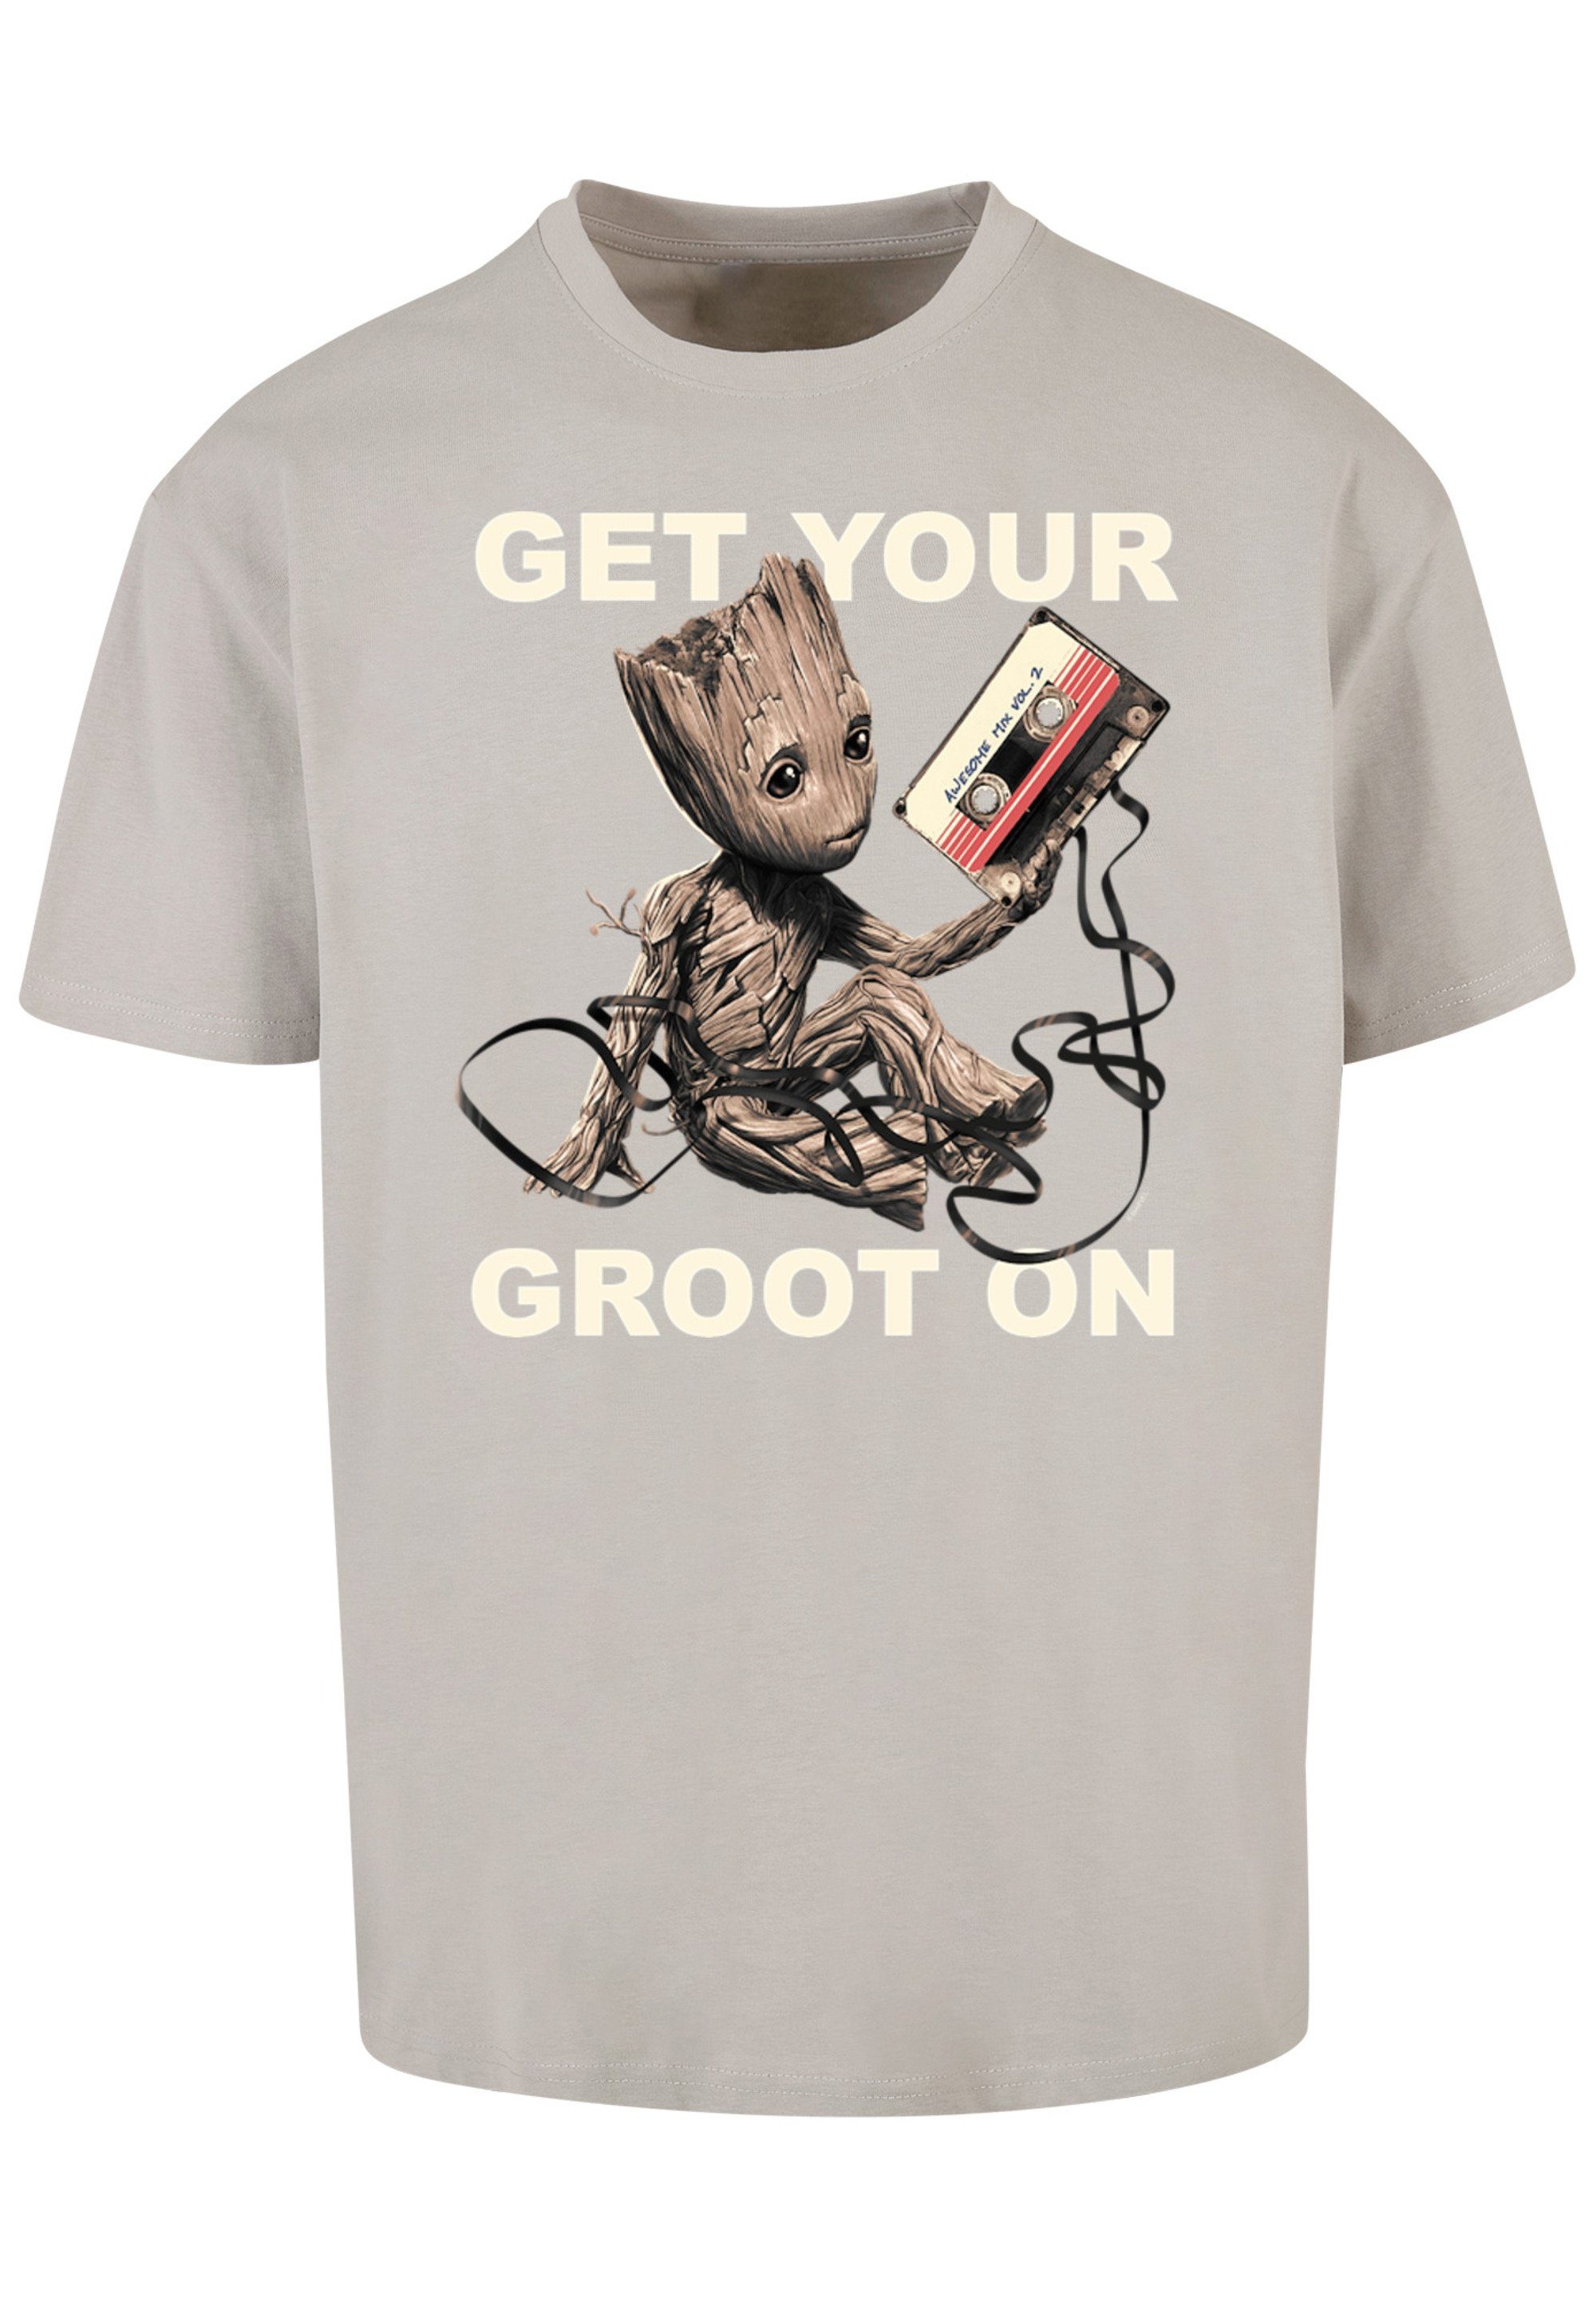 lightasphalt Marvel On F4NT4STIC your Guardians of Print Get Galaxy Groot T-Shirt the